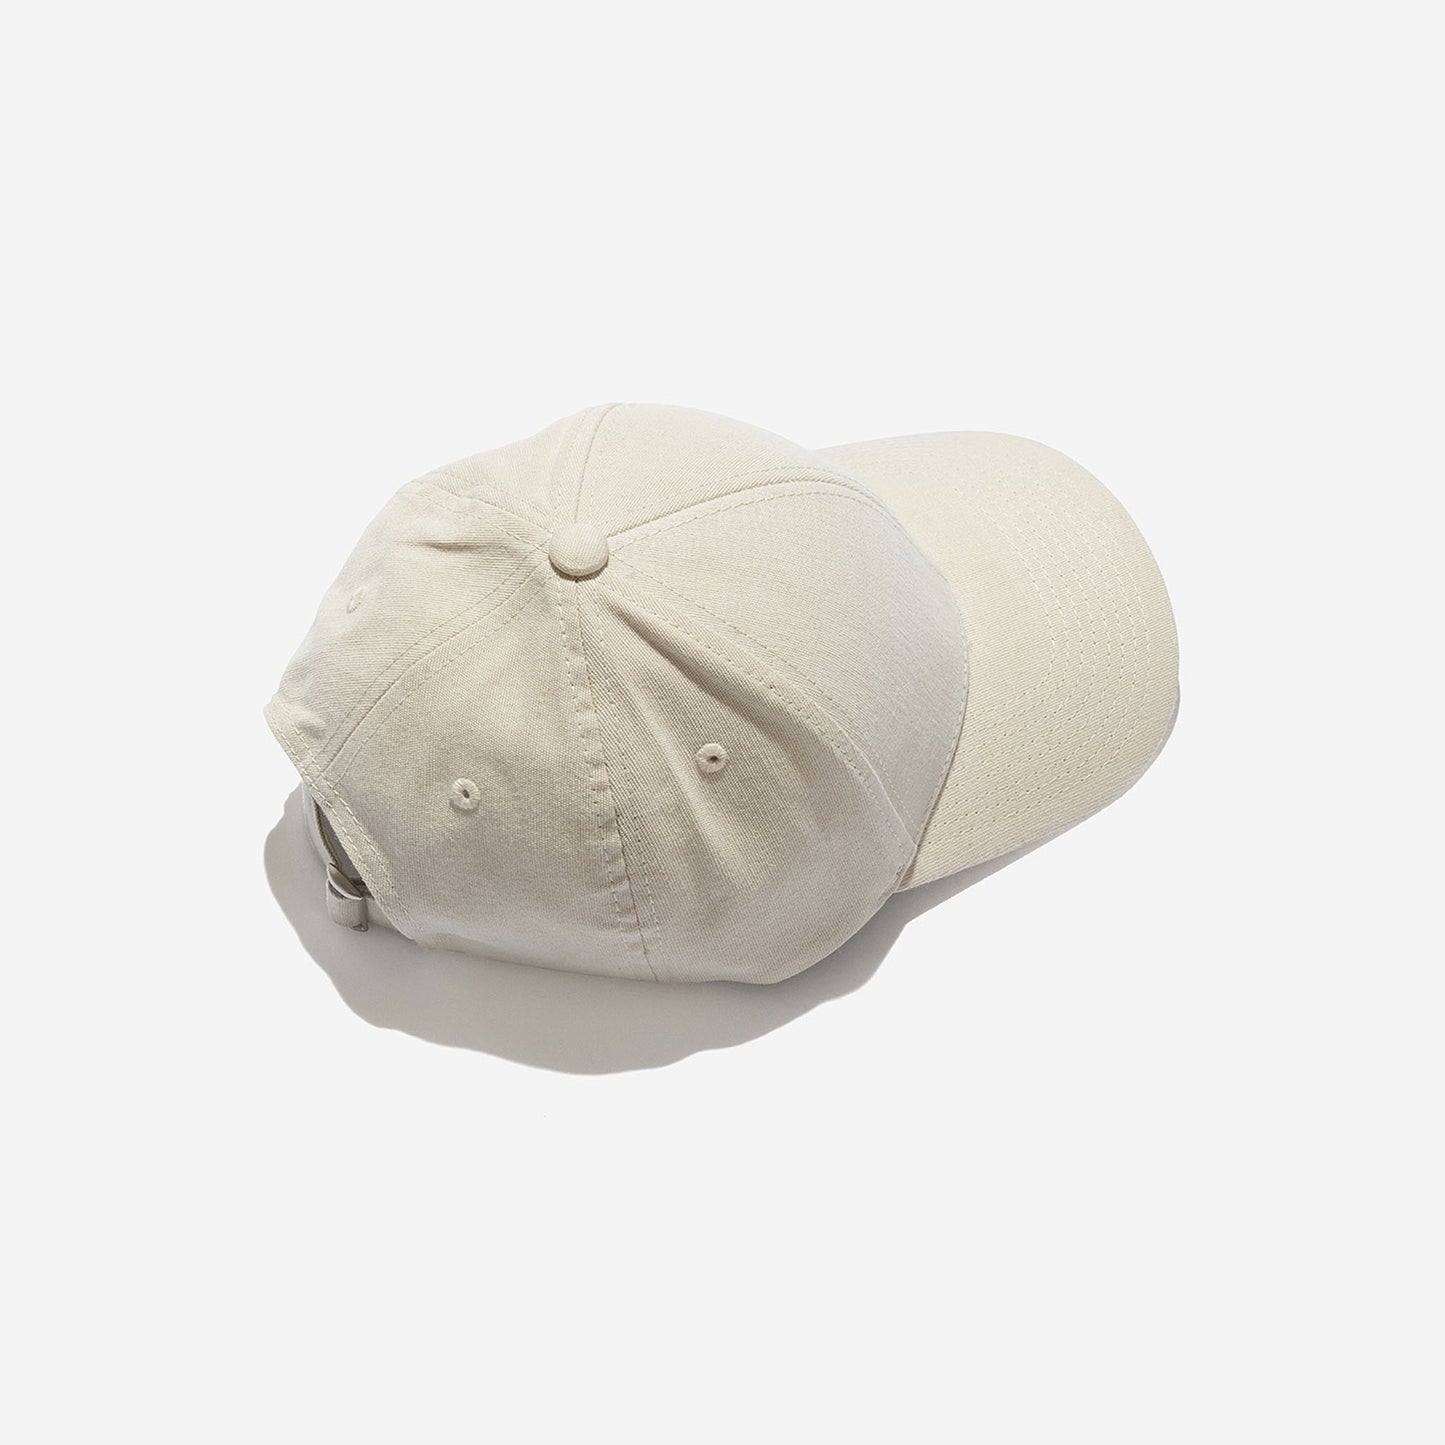 Casual Style Baseball Cap, Oyster